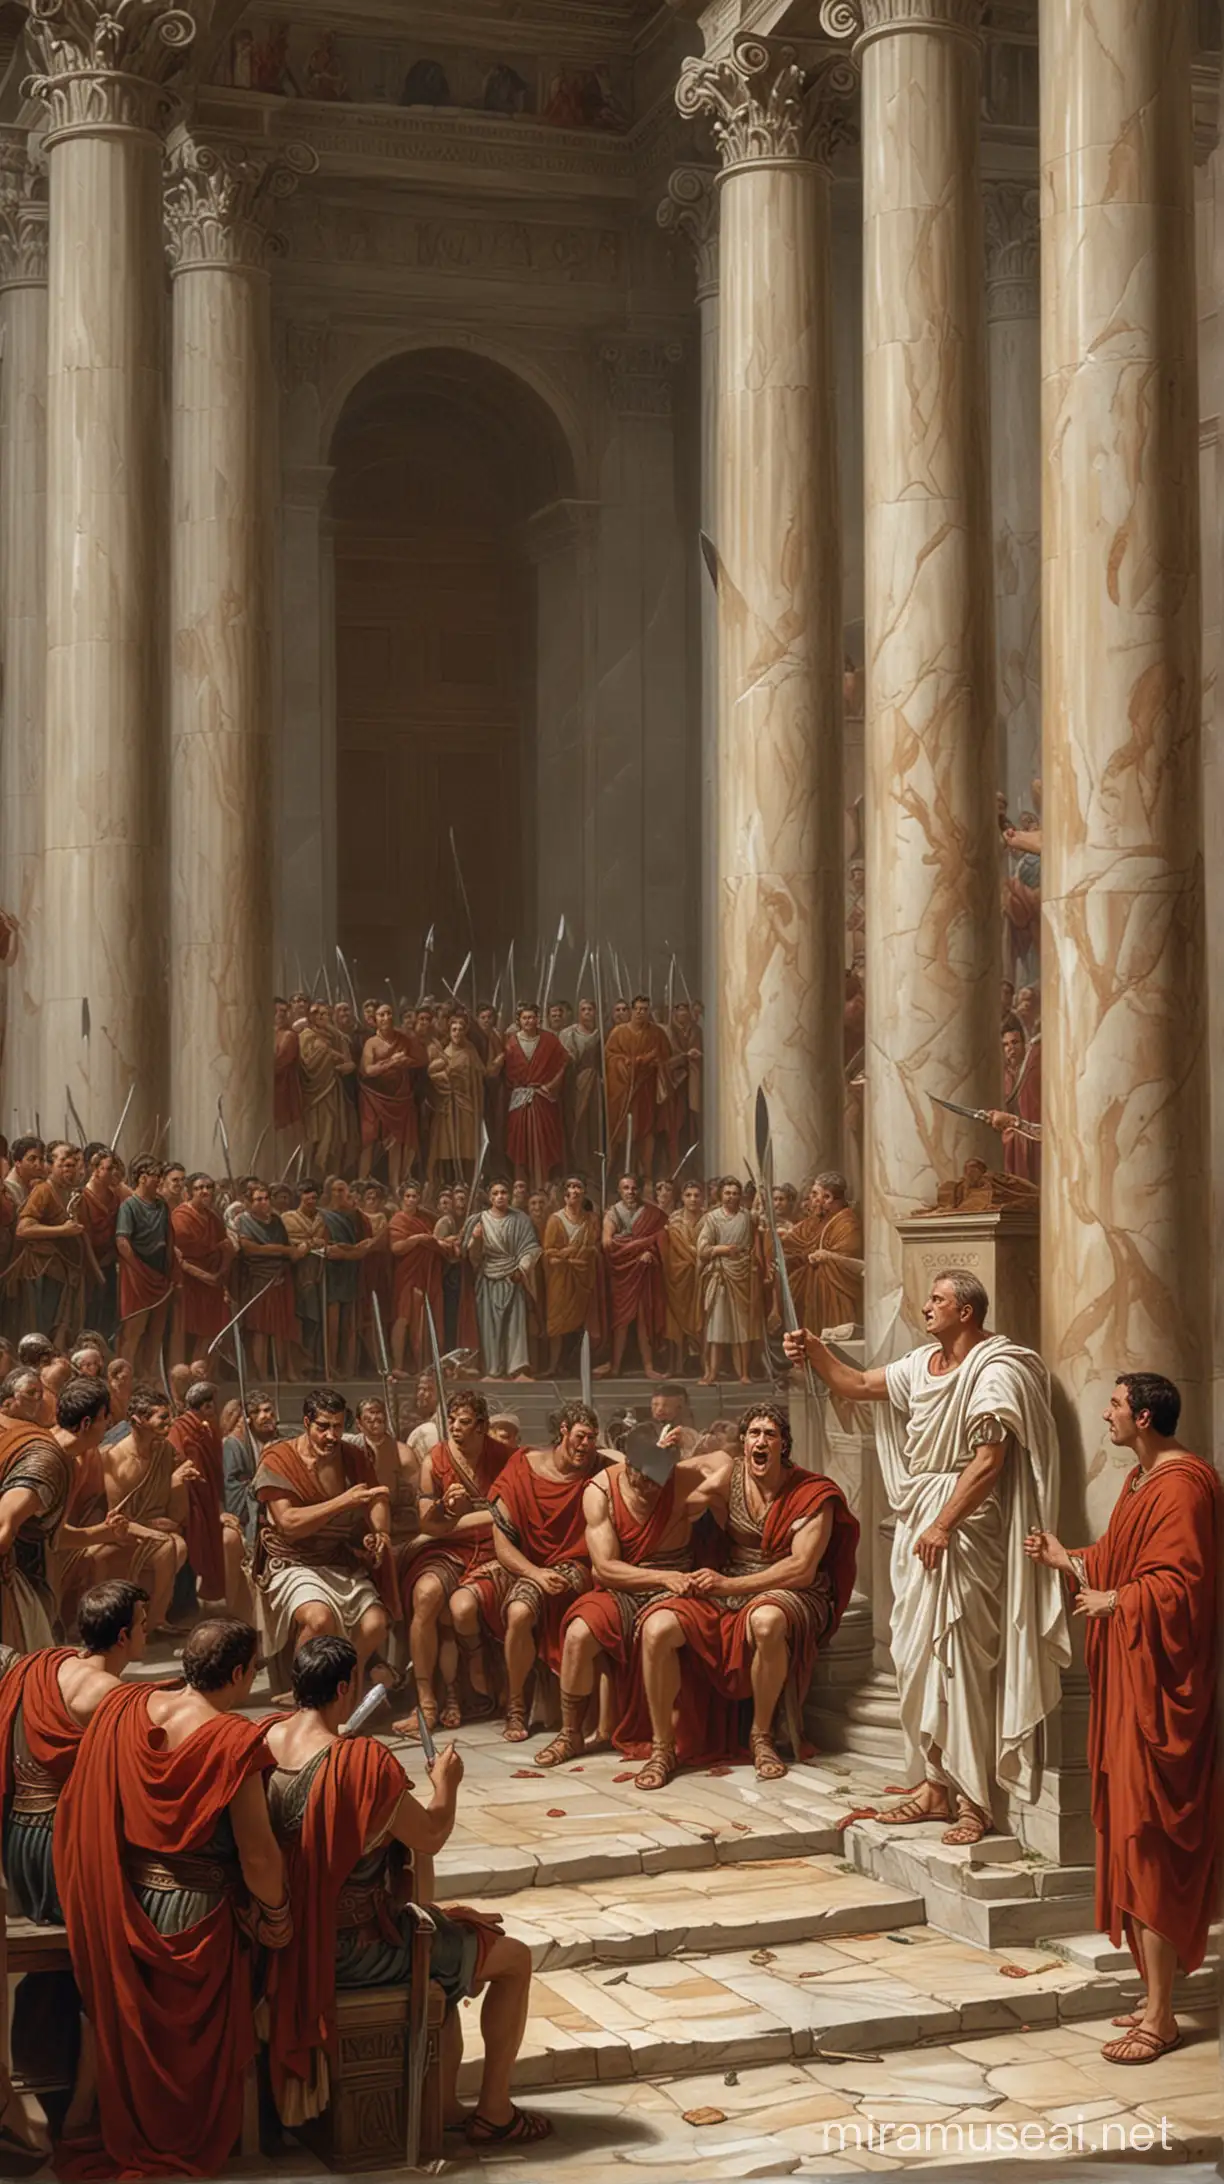 Scene of Julius Caesar being attacked by Senators in the Roman Senate: Julius Caesar is seated in the Senate surrounded by Roman Senators. Behind him stands a structure reflecting the architecture of first-century Rome. A group of Senators approaches Julius Caesar, some drawing their swords, preparing for the attack. Julius Caesar's expression is filled with shock and a sense of betrayal.

